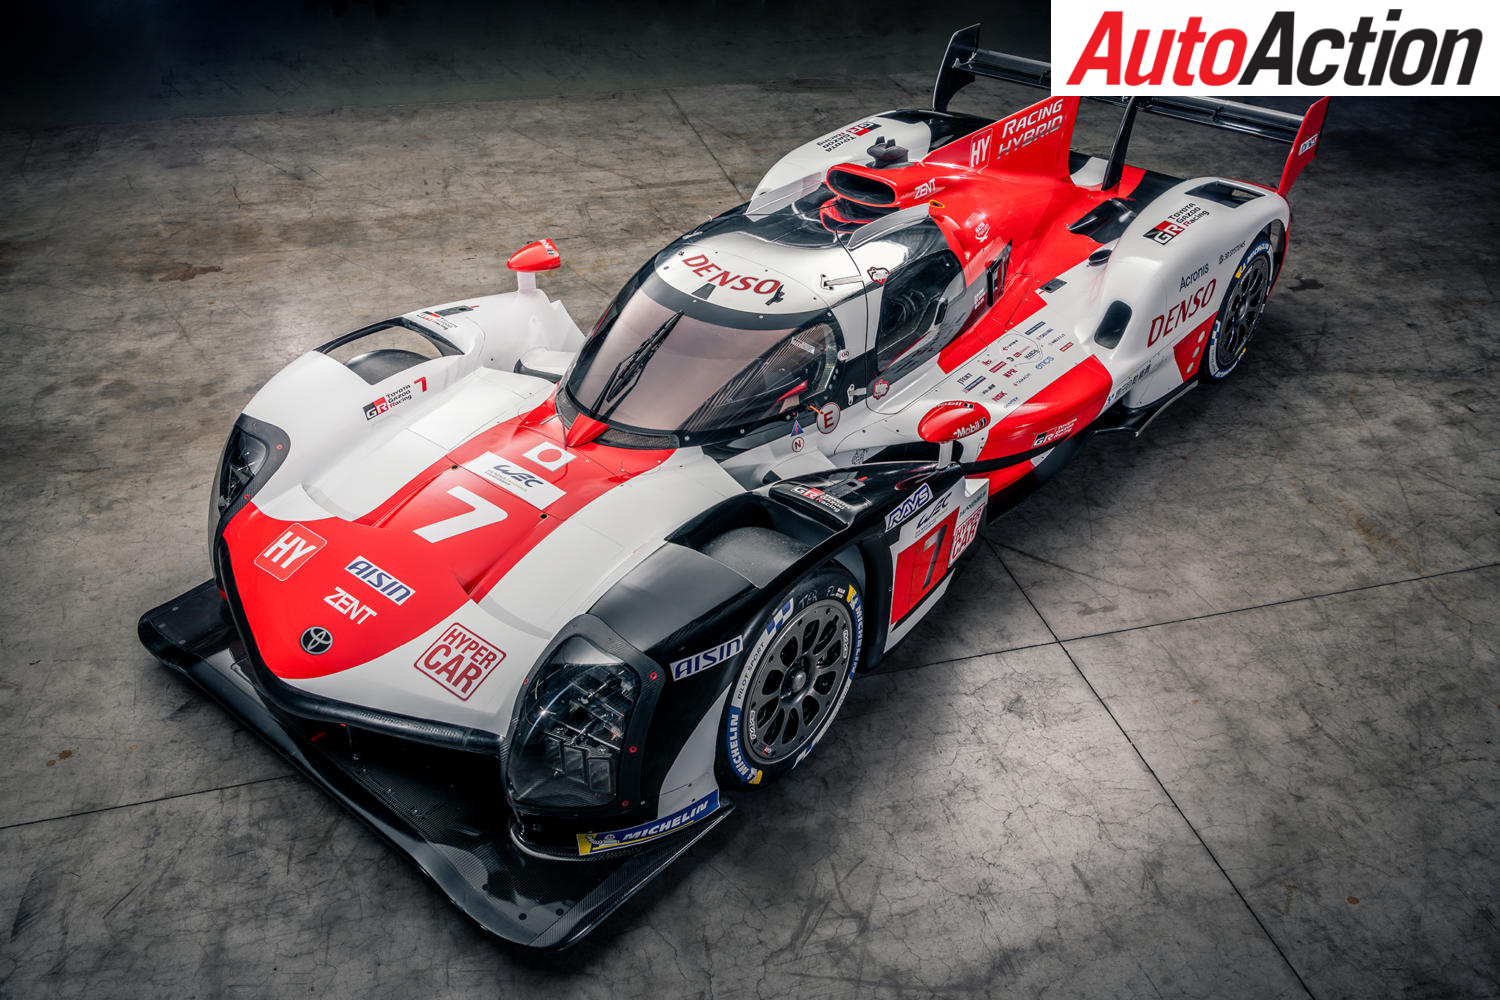 Toyota officially reveal Le Mans Hypercar Image Toyota Auto Action